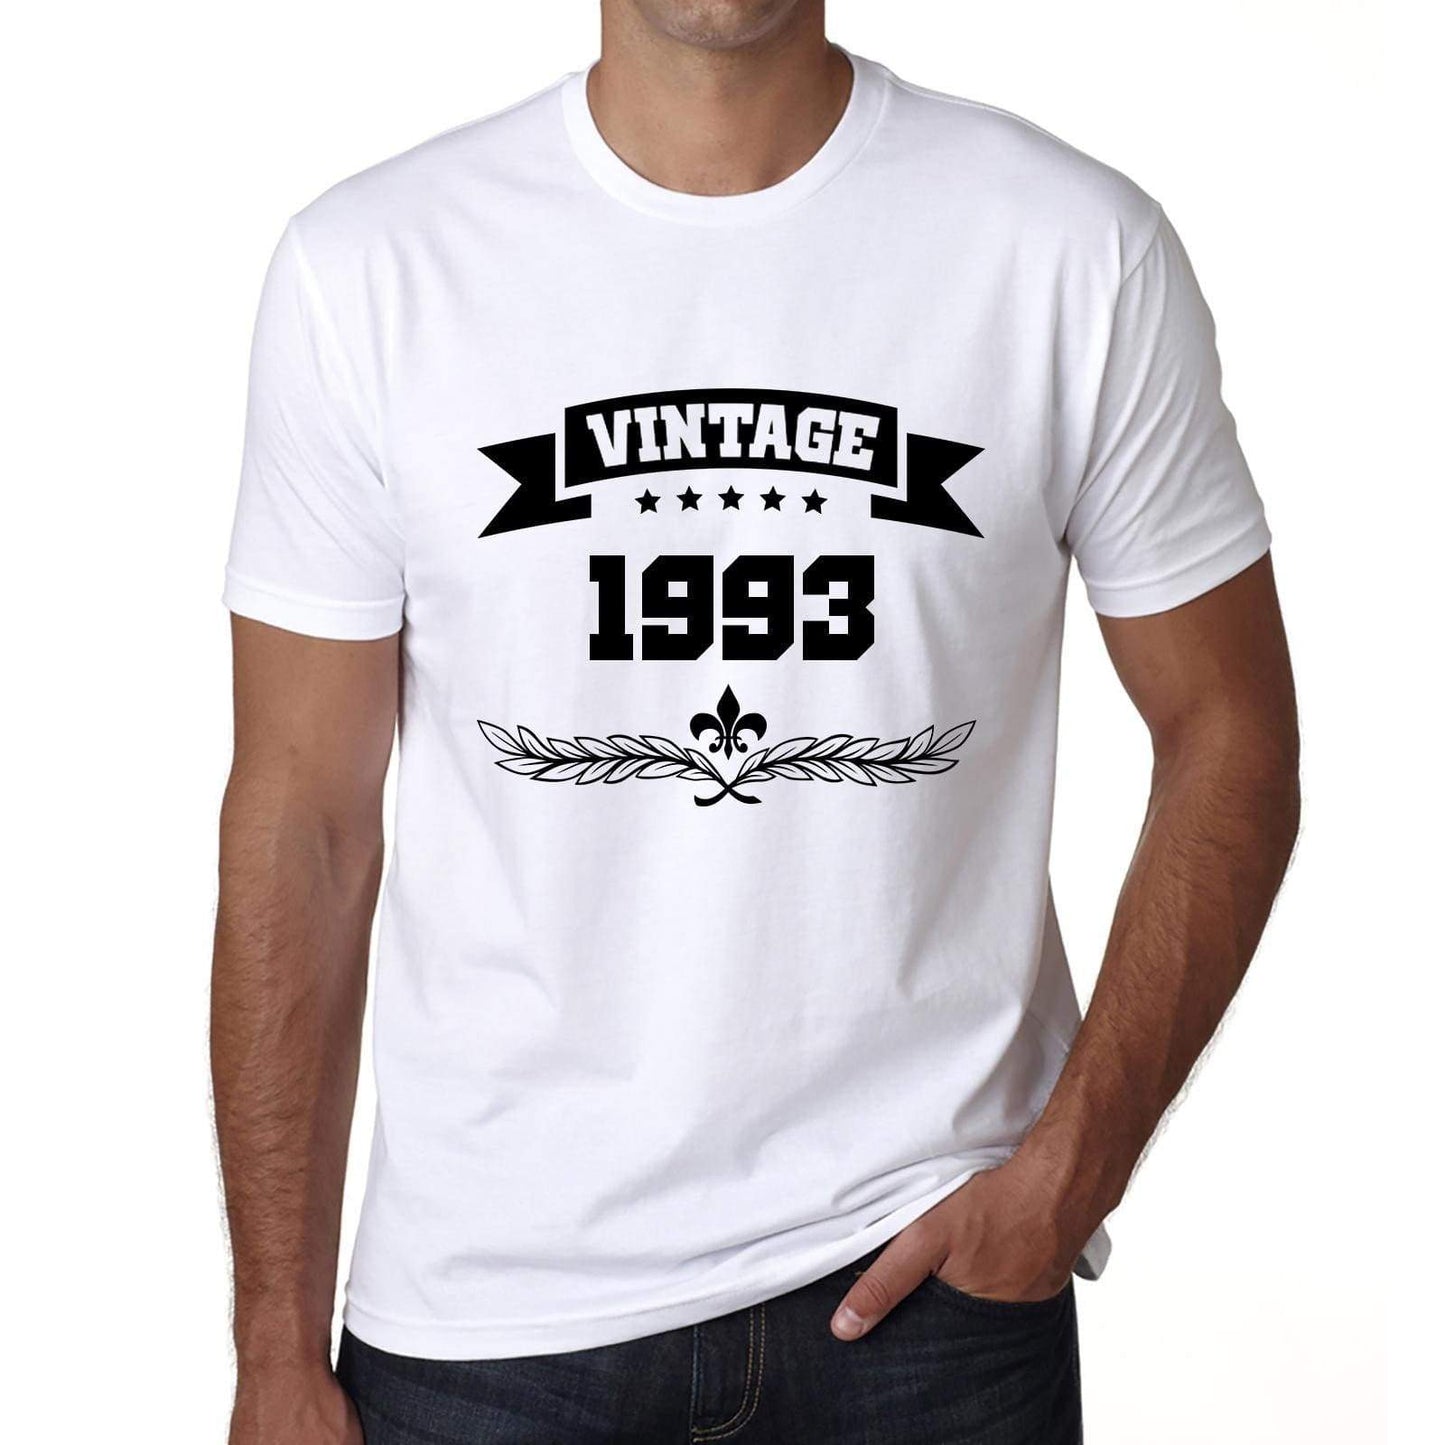 1993 Vintage Year White Mens Short Sleeve Round Neck T-Shirt 00096 - White / S - Casual